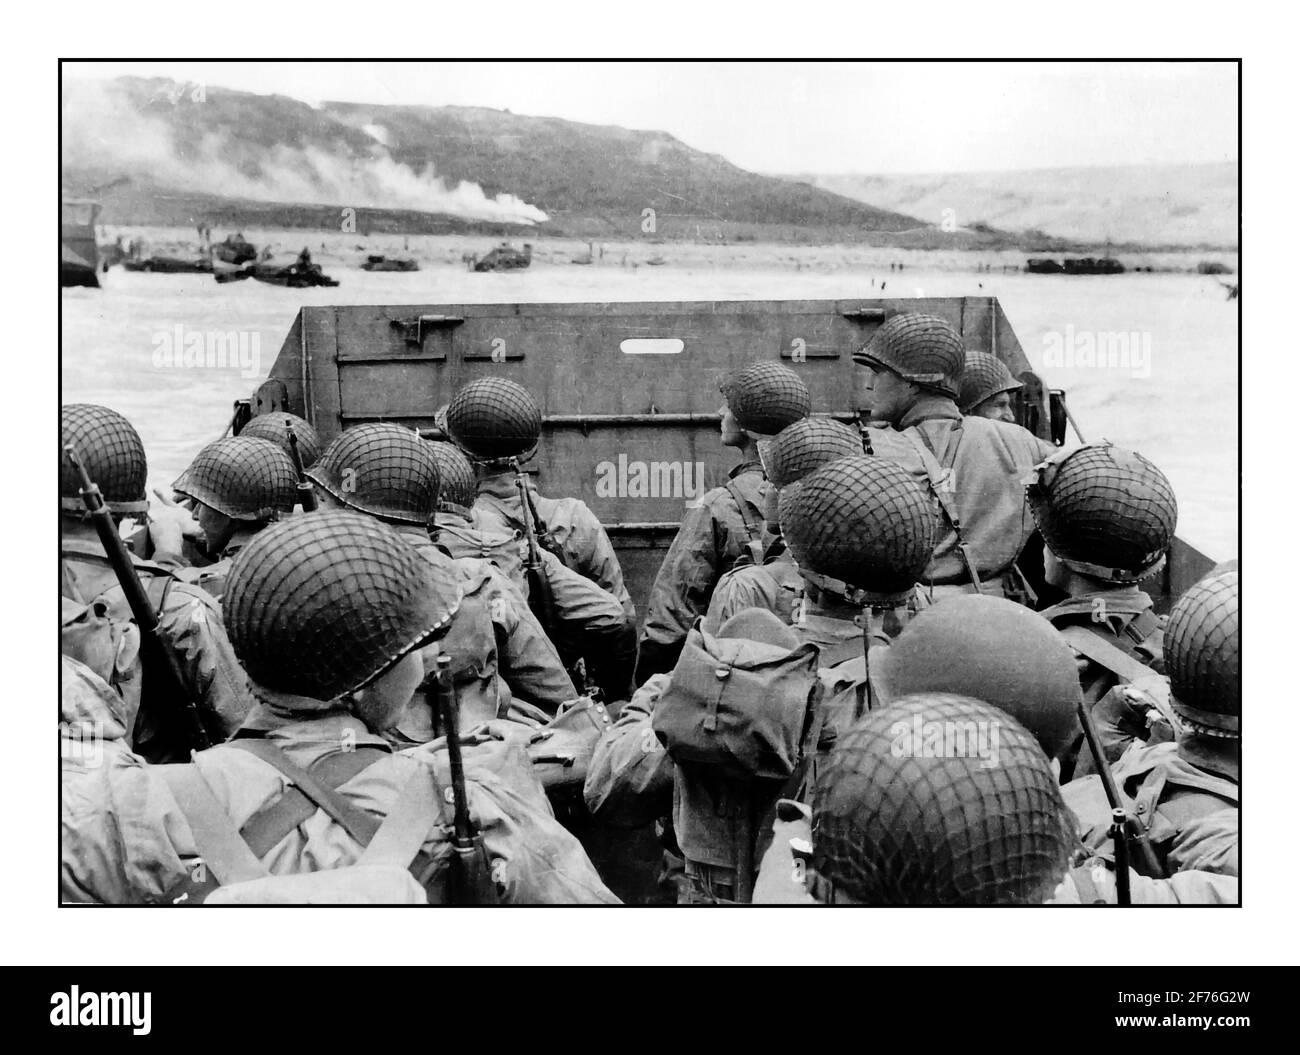 D-Day Omaha invasion beach landing craft under dull skies with American troops in landing craft visually guided by smoke flares approaching Omaha Beach Normandy France 6th June 1944 Stock Photo